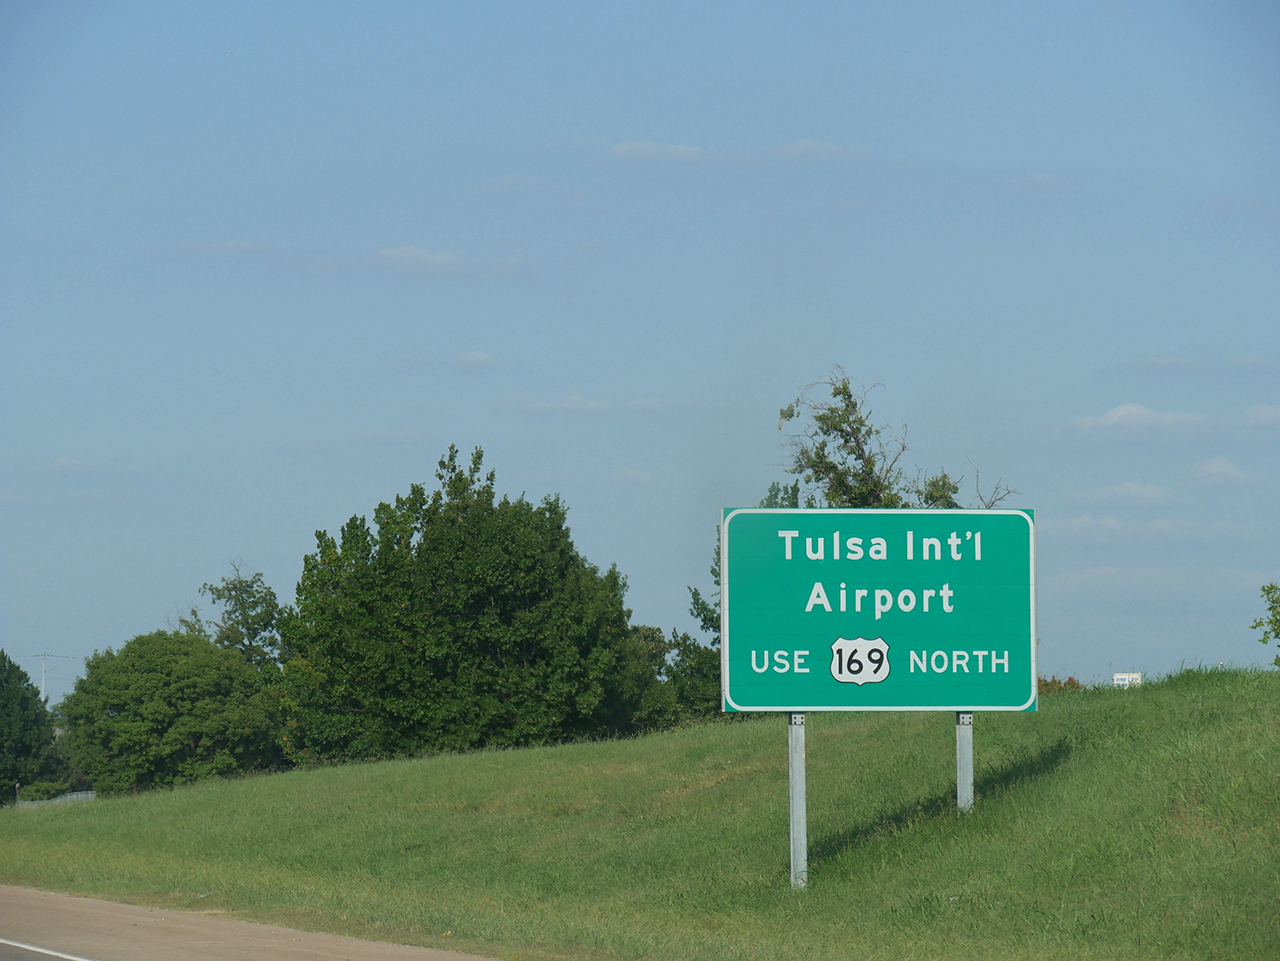 Image of Tulsa Airport road sign